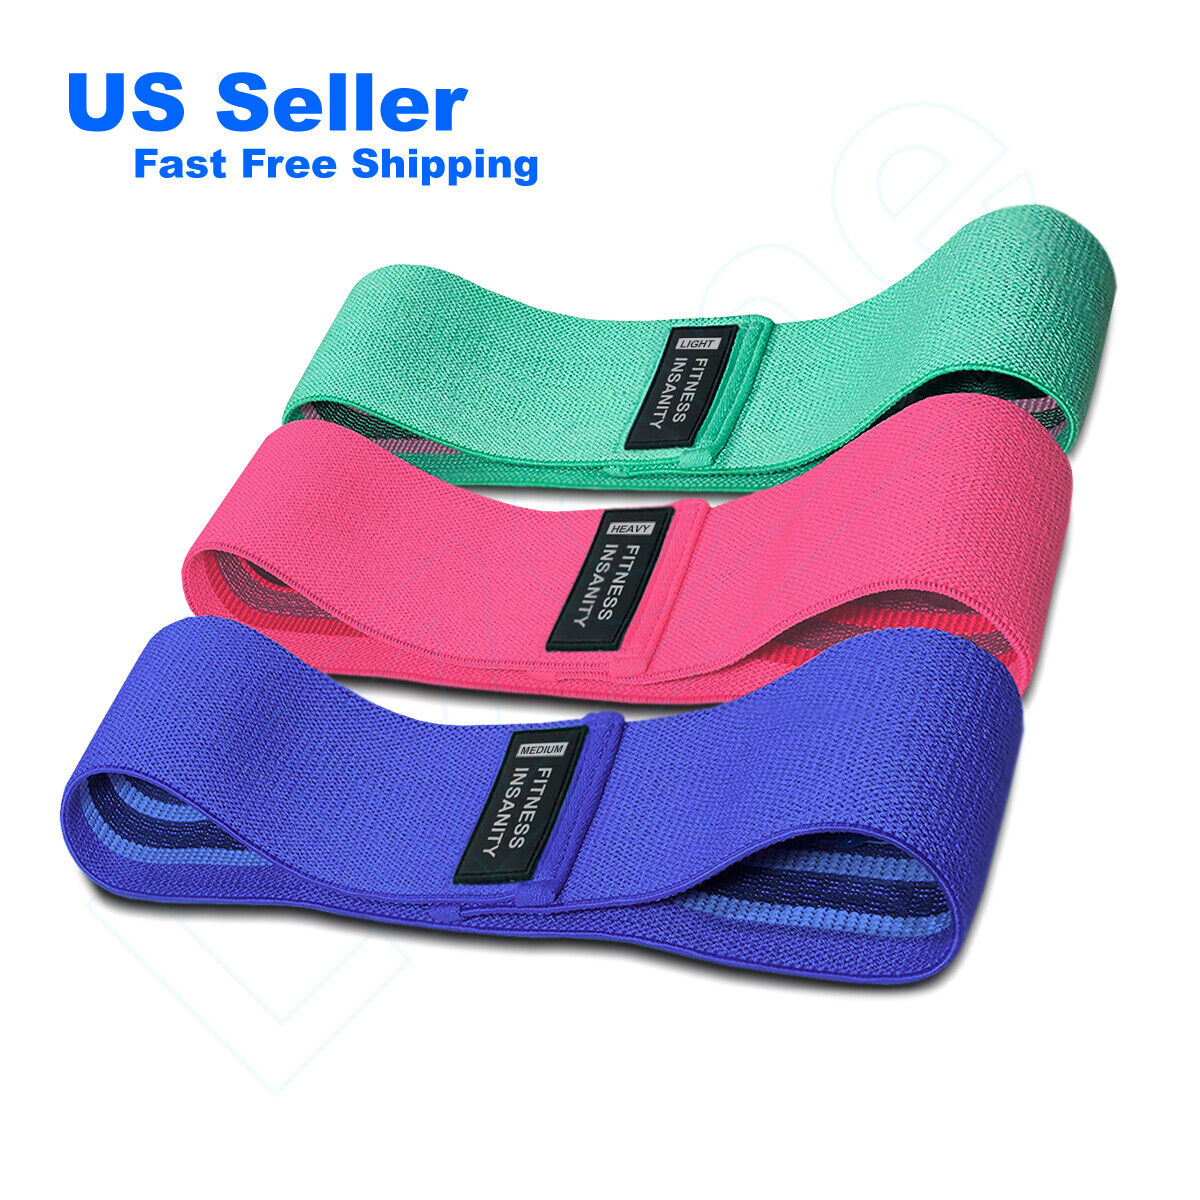 3 Pcs Exercise Workout Gym Fitness Fabric Cloth Resistance Booty Bands Loop Set Lizone 3PRBS